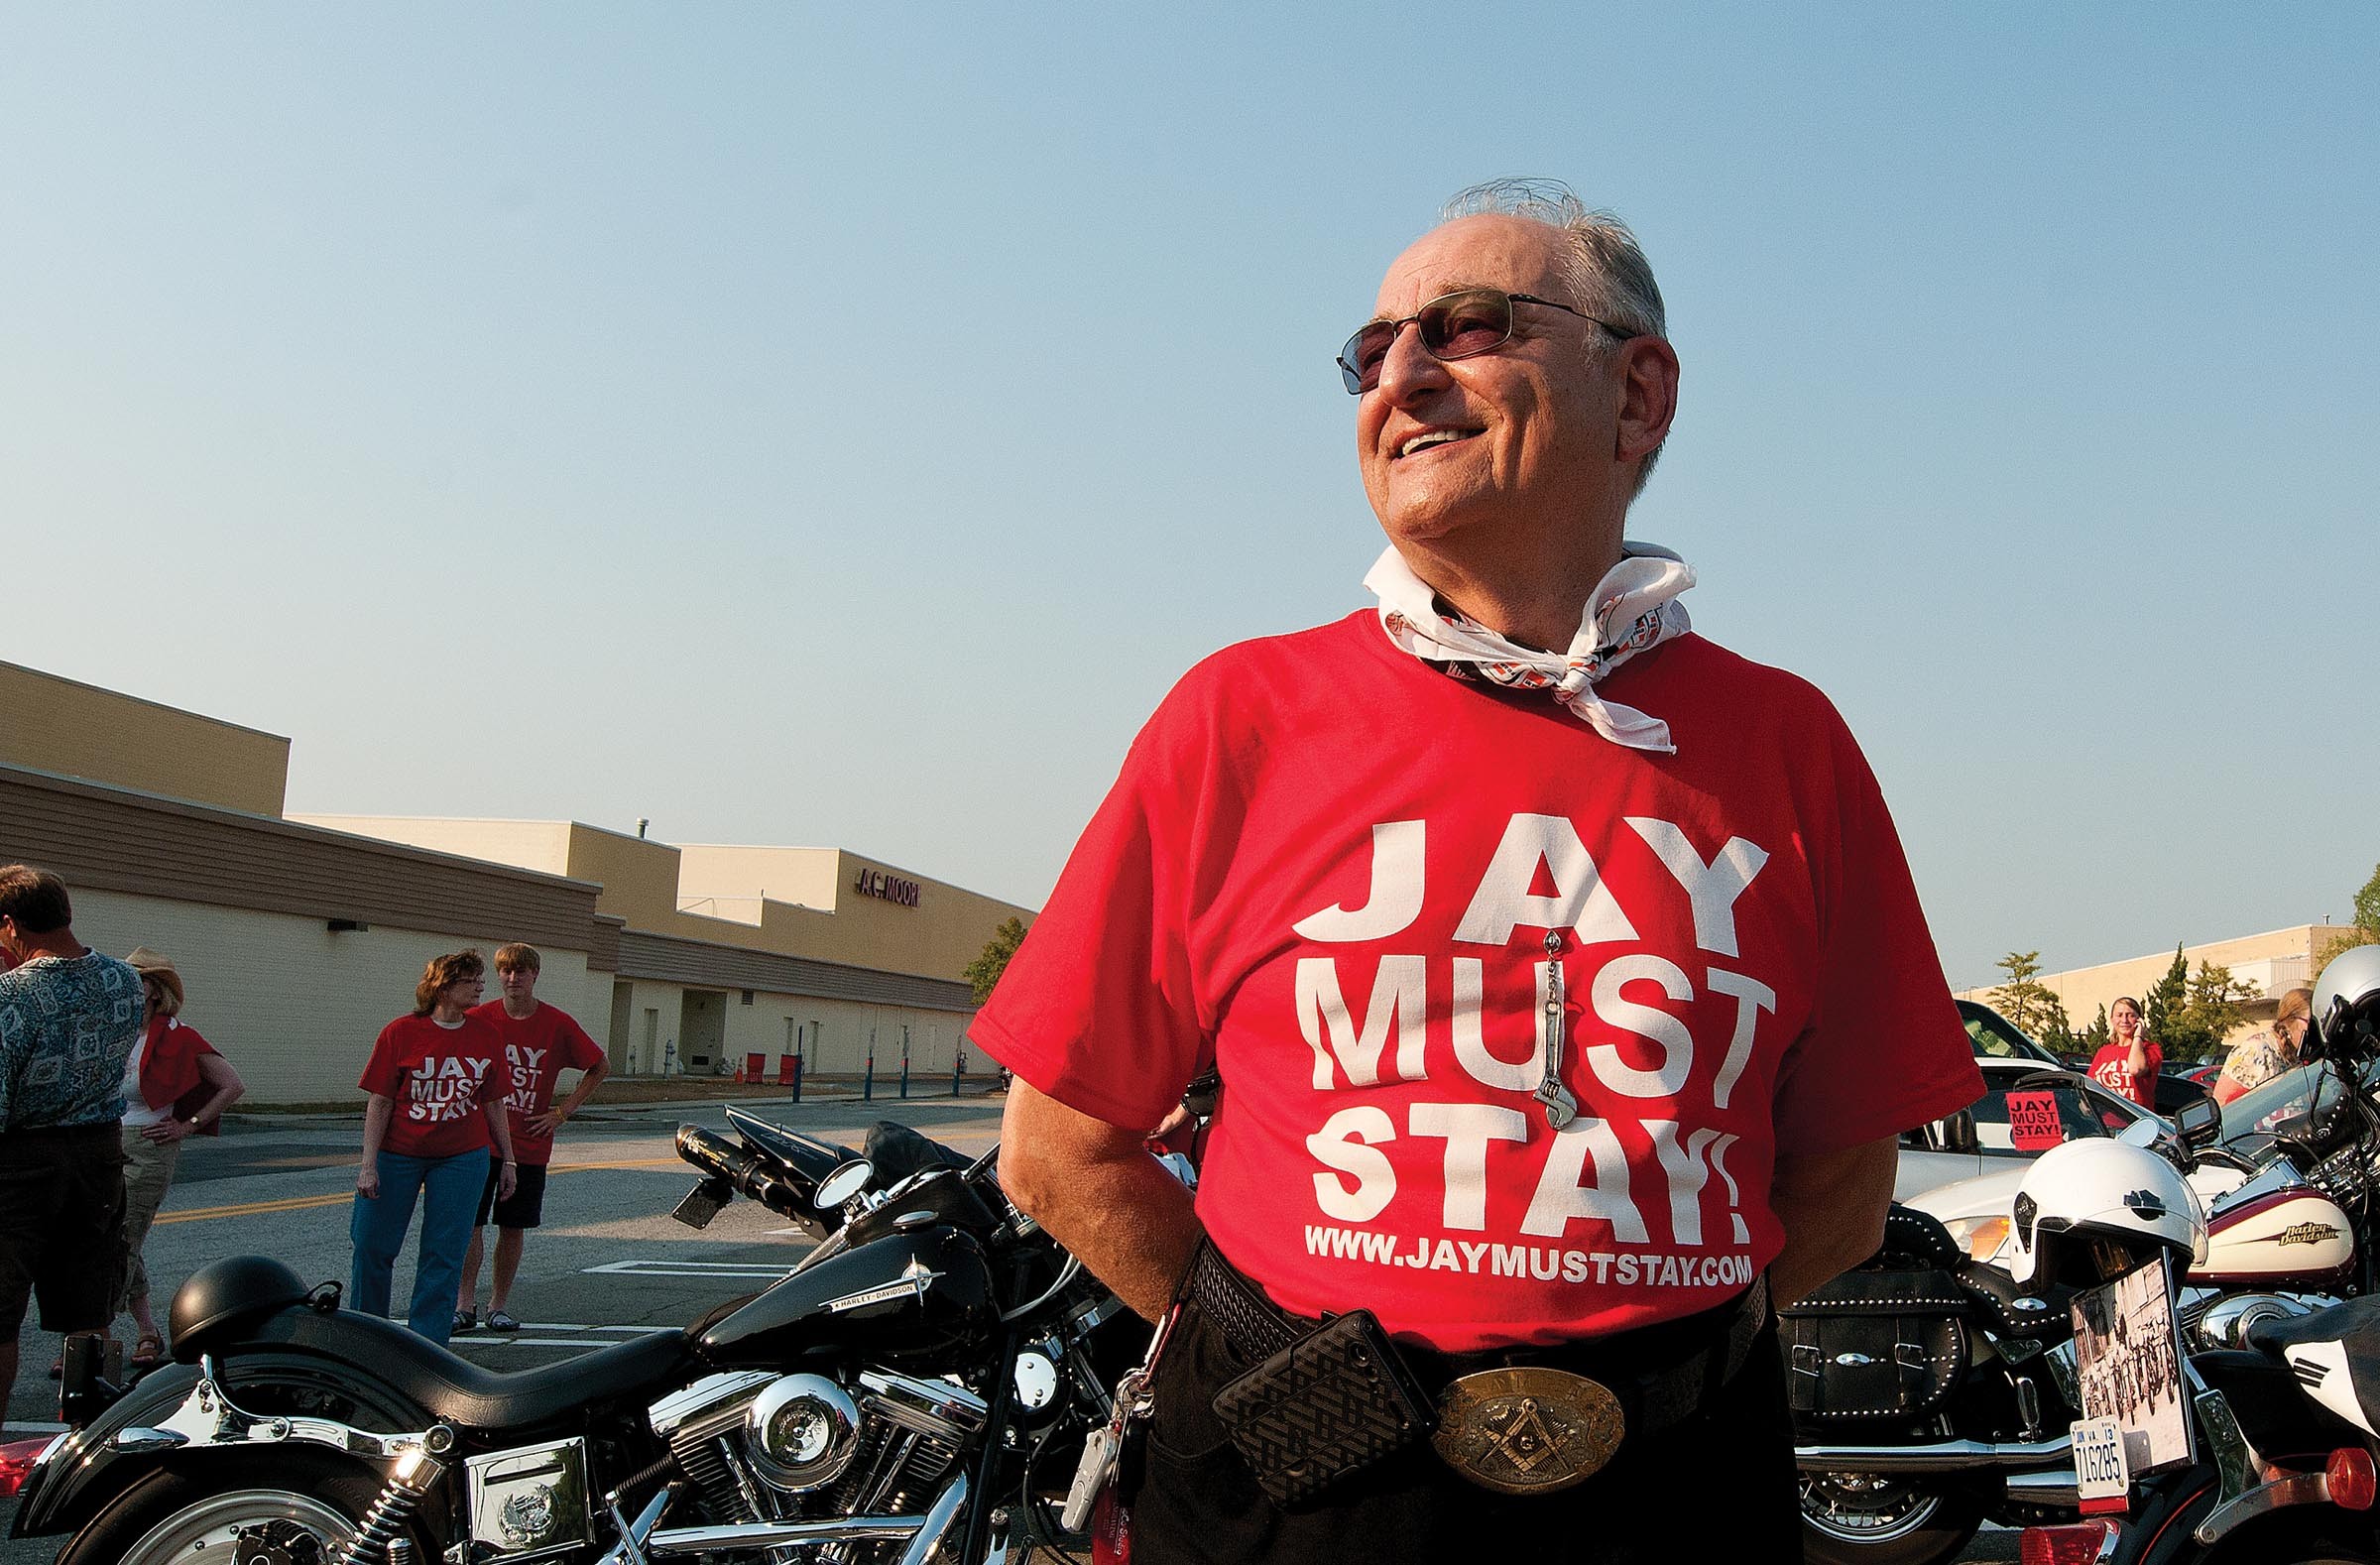 After his ouster from the Virginia Holocaust Museum, Jay Ipson found supporters from all walks of life — including motorcycle enthusiasts, who held a rally in his honor in late June. - SCOTT ELMQUIST